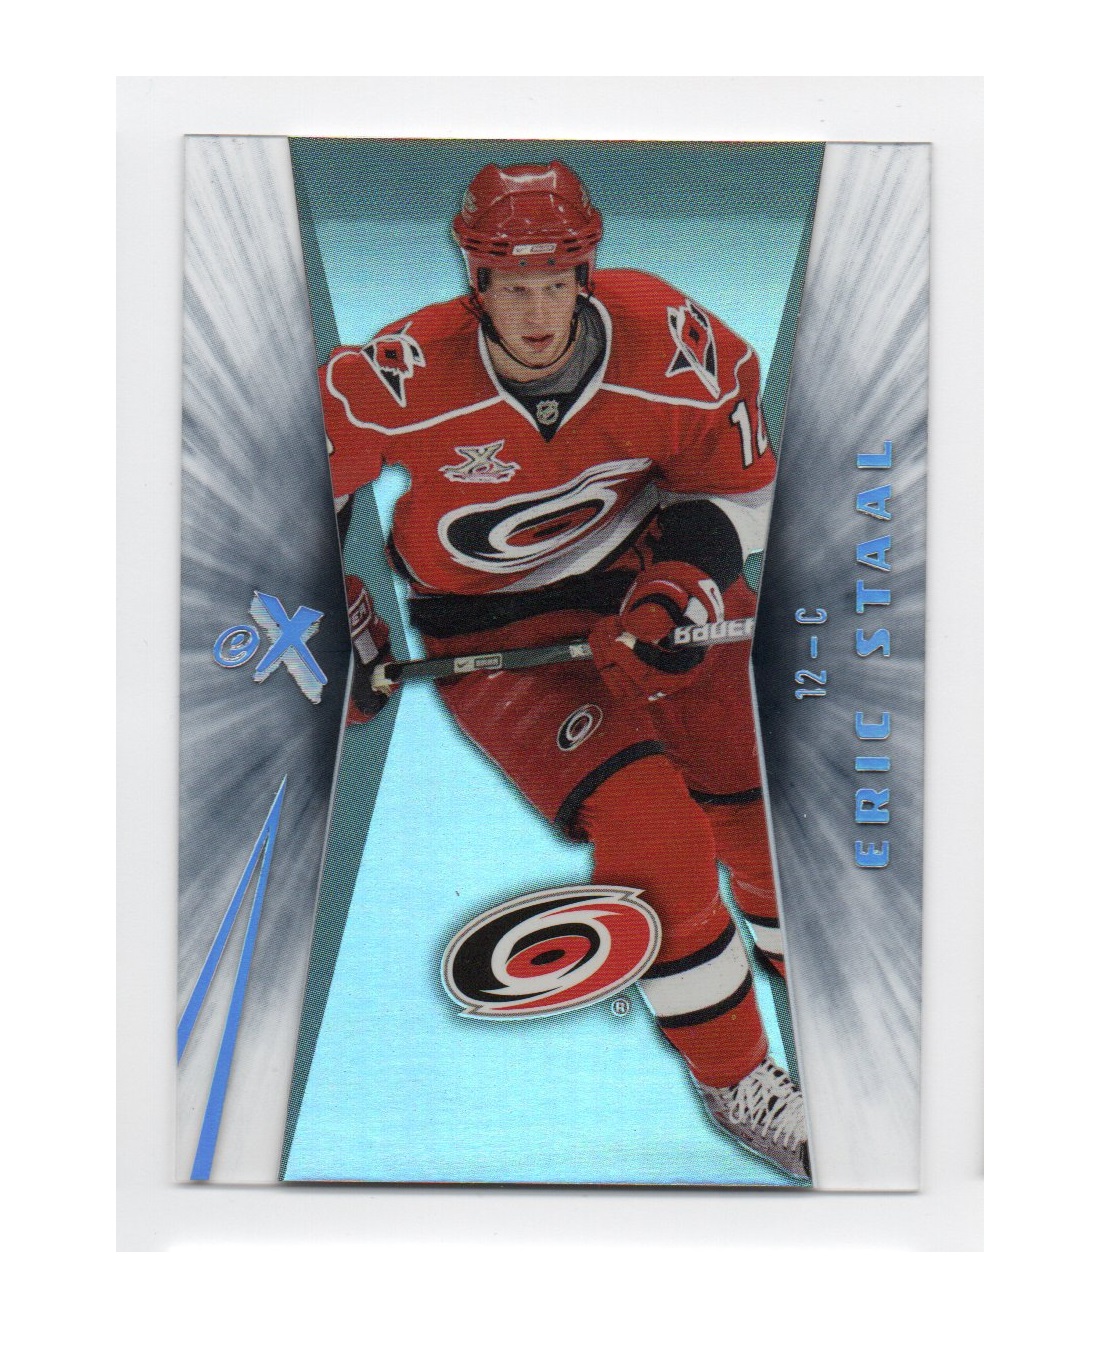 2008-09 Ultra EX Essential Credentials #35 Eric Staal (15-X78-HURRICANES)